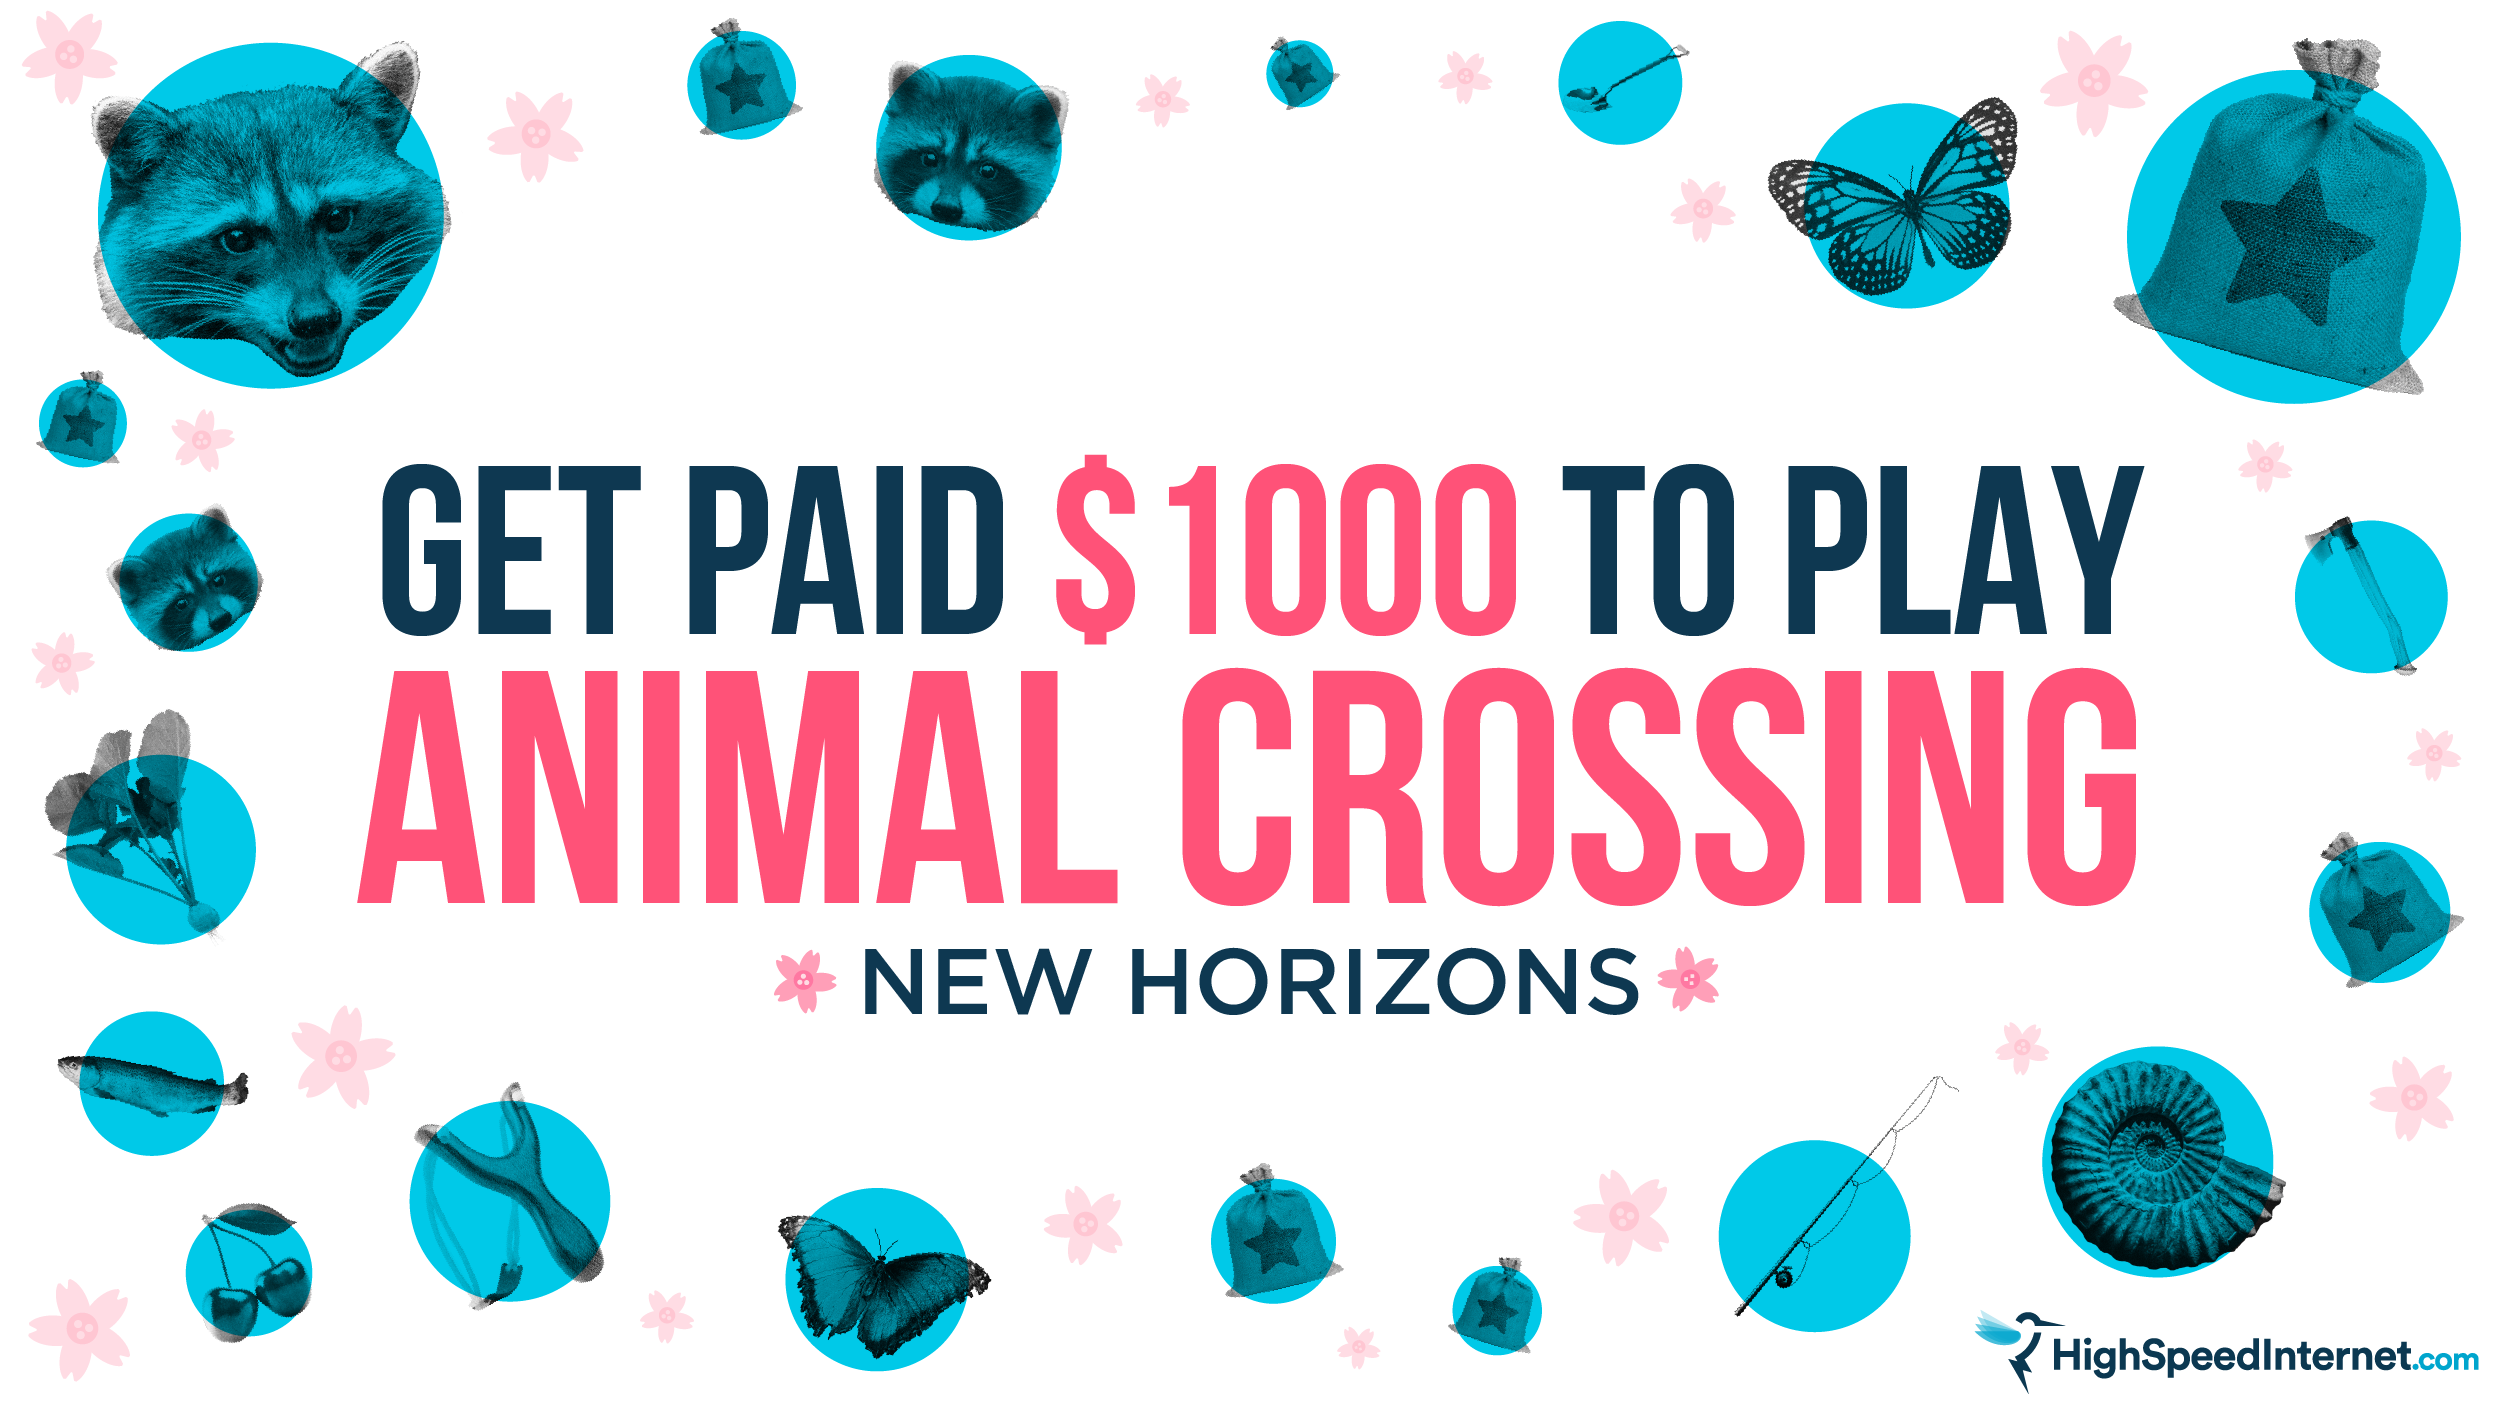 Get paid $1000 to play Animal Crossing